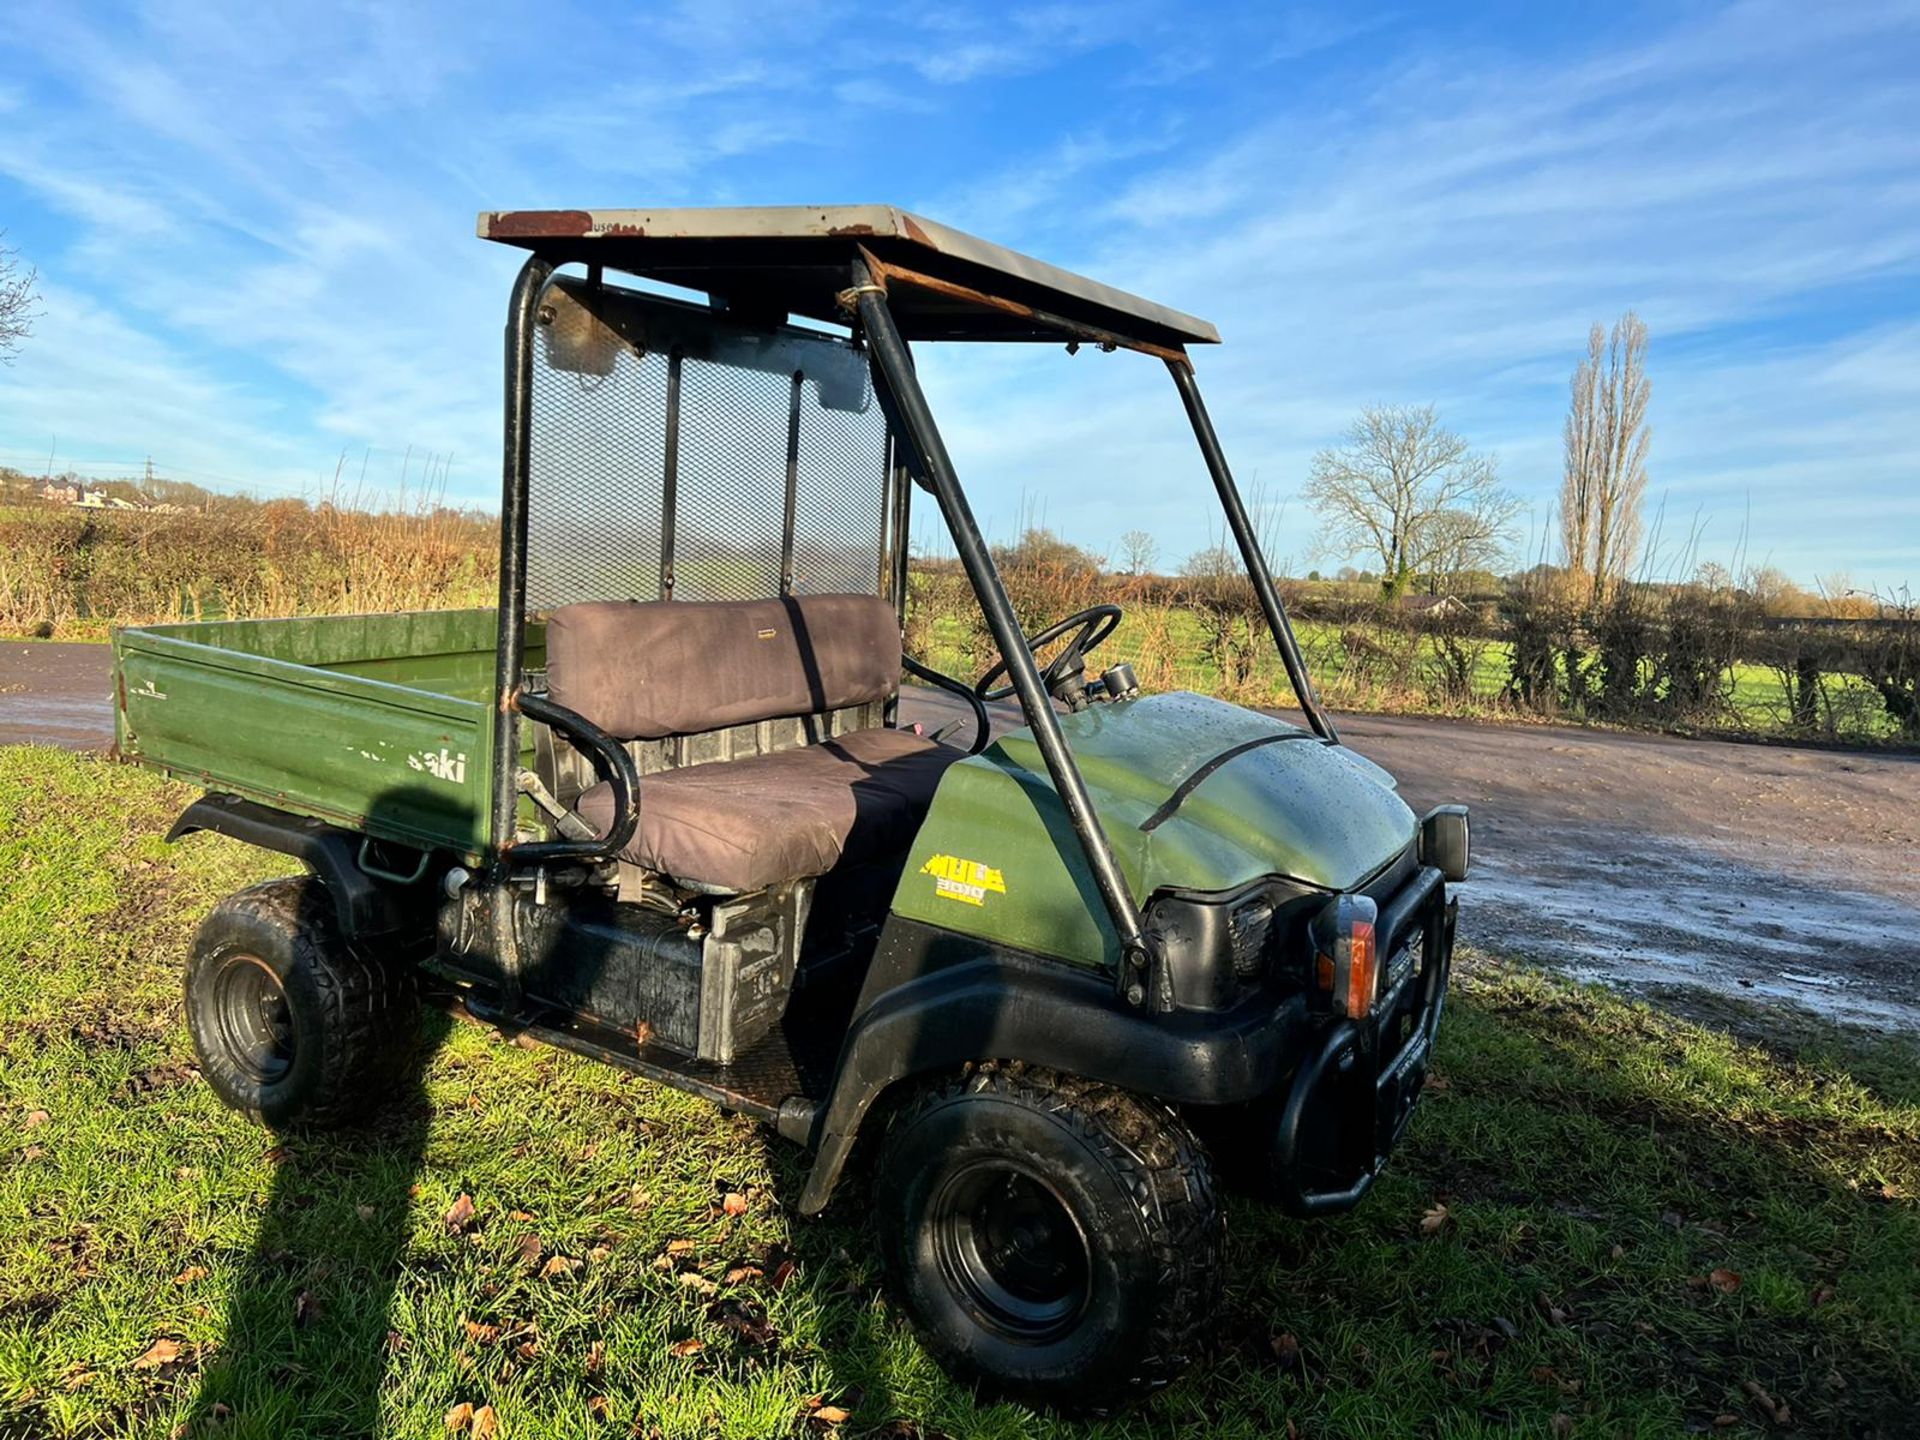 KAWASAKI MULE 3010 4WD BUGGI, RUNS AND DRIVES, SHOWING A LOW 2256 HOURS, ROAD REGISTERED *PLUS VAT*